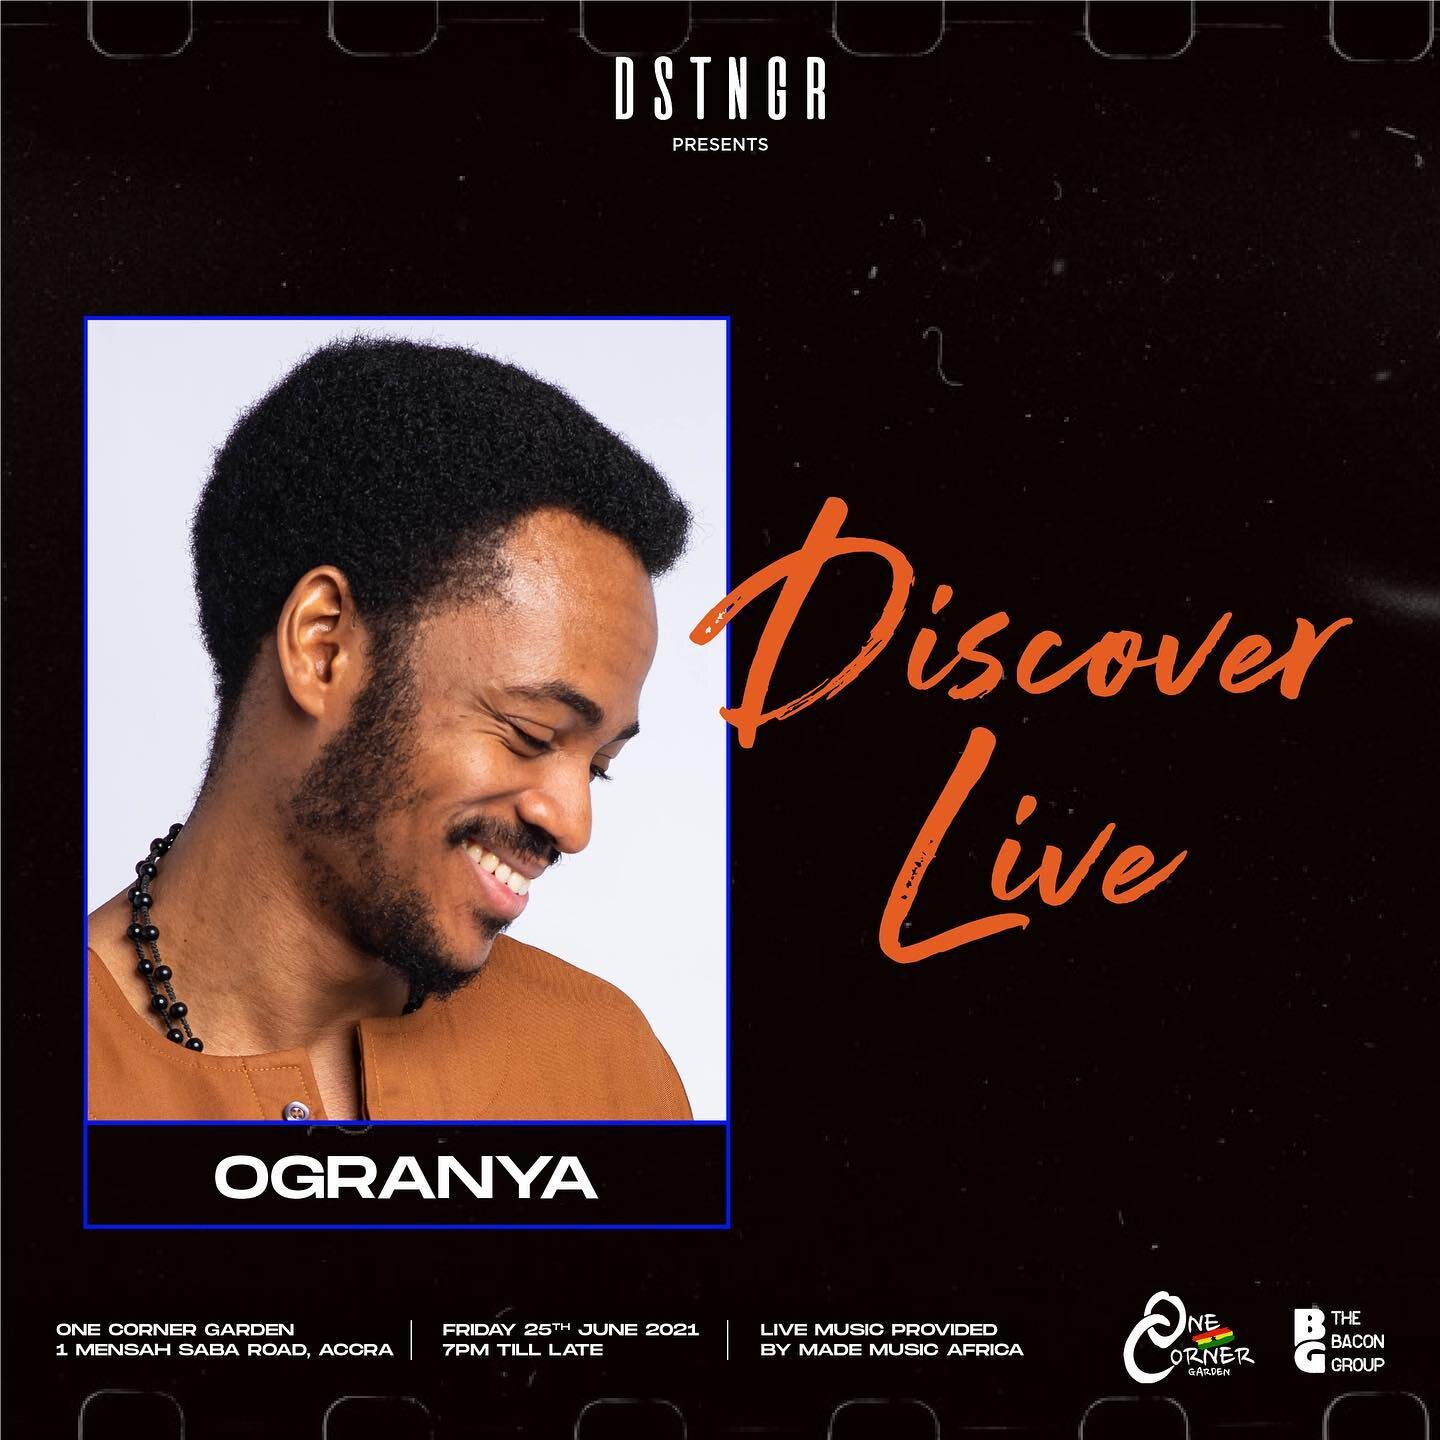 This FRIDAY! Nigerian singer-songwriter @ogranya will bring his sensual, soulful and r&amp;b tinged magical sounds to &lsquo;DISCOVER LIVE&rsquo; at @onecornergh!

FREE ENTRY! Doors open at 7PM! 

Swipe left to see his limited edition &lsquo;DISCOVER